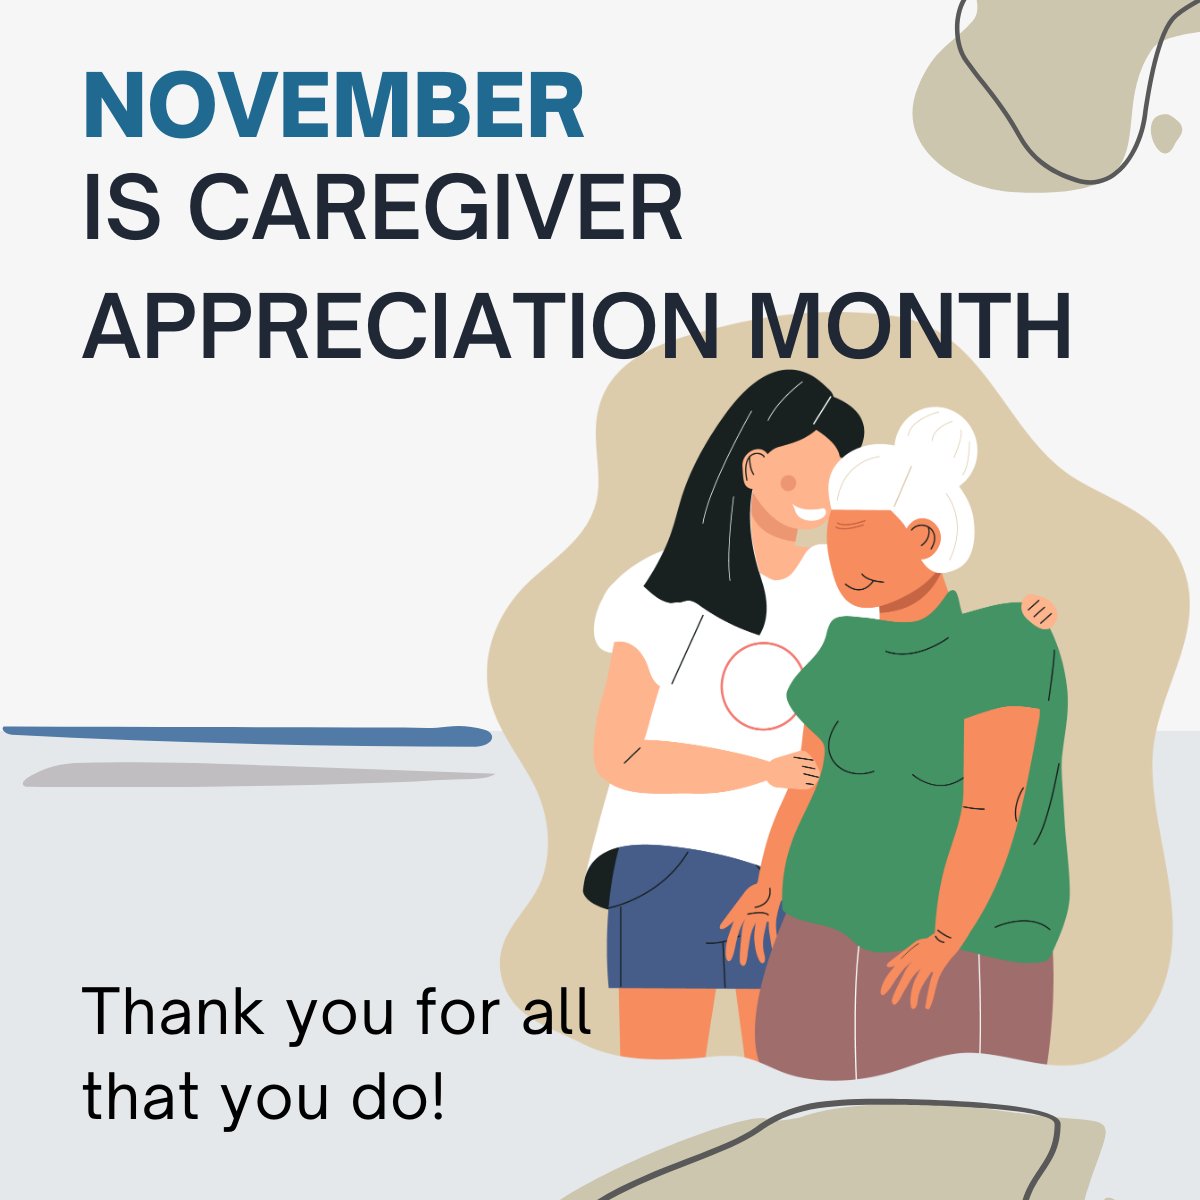 November is also Caregiver Appreciation Month! Thank you to all of our awesome caregivers! We appreciate all that you do! #CaregiverAppreciation